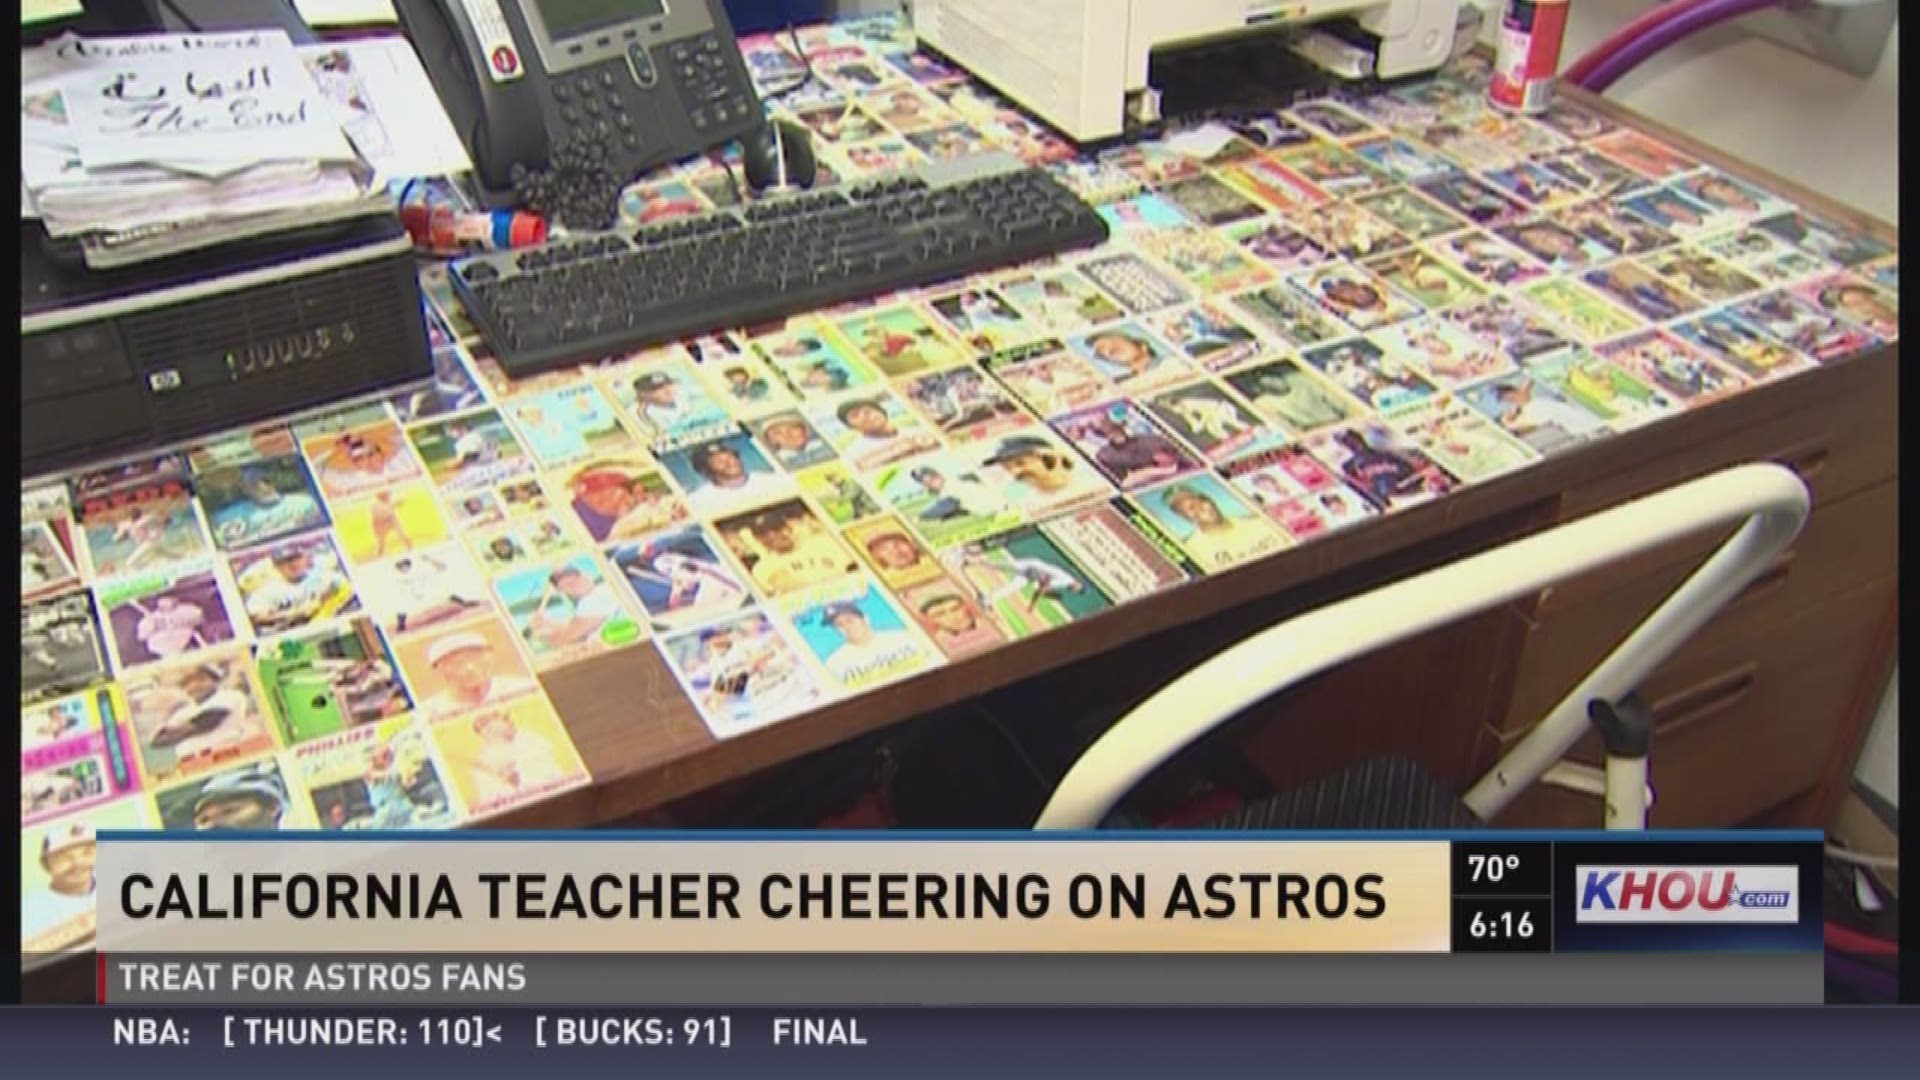 Deep in Dodger country, one California teacher is cheering on the Astros. 